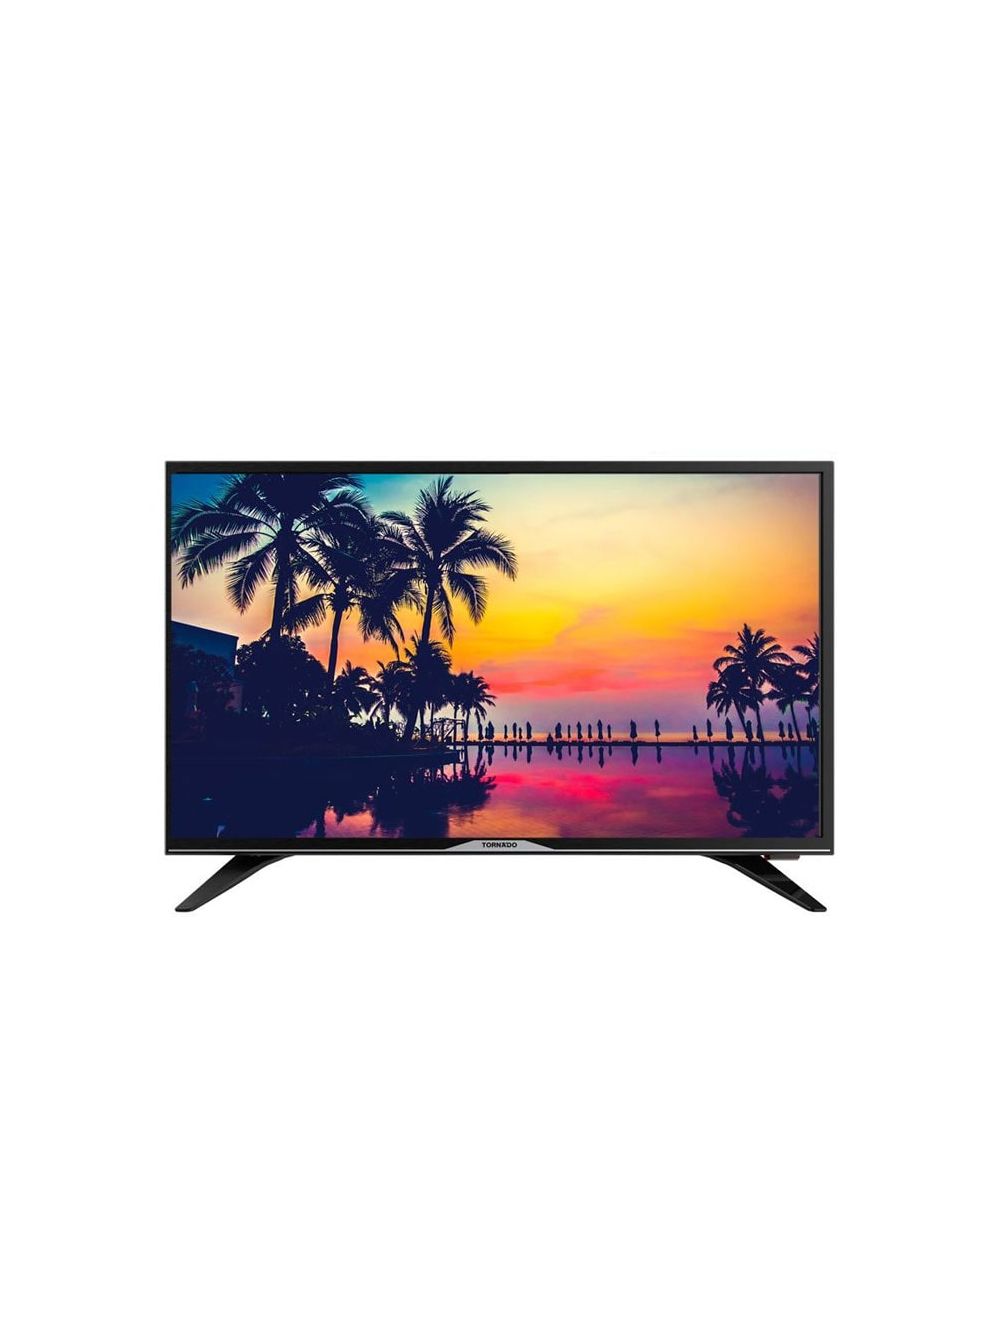 Tornado LED TV 32 Inch HD With Built-In Receiver - 32ER9300E